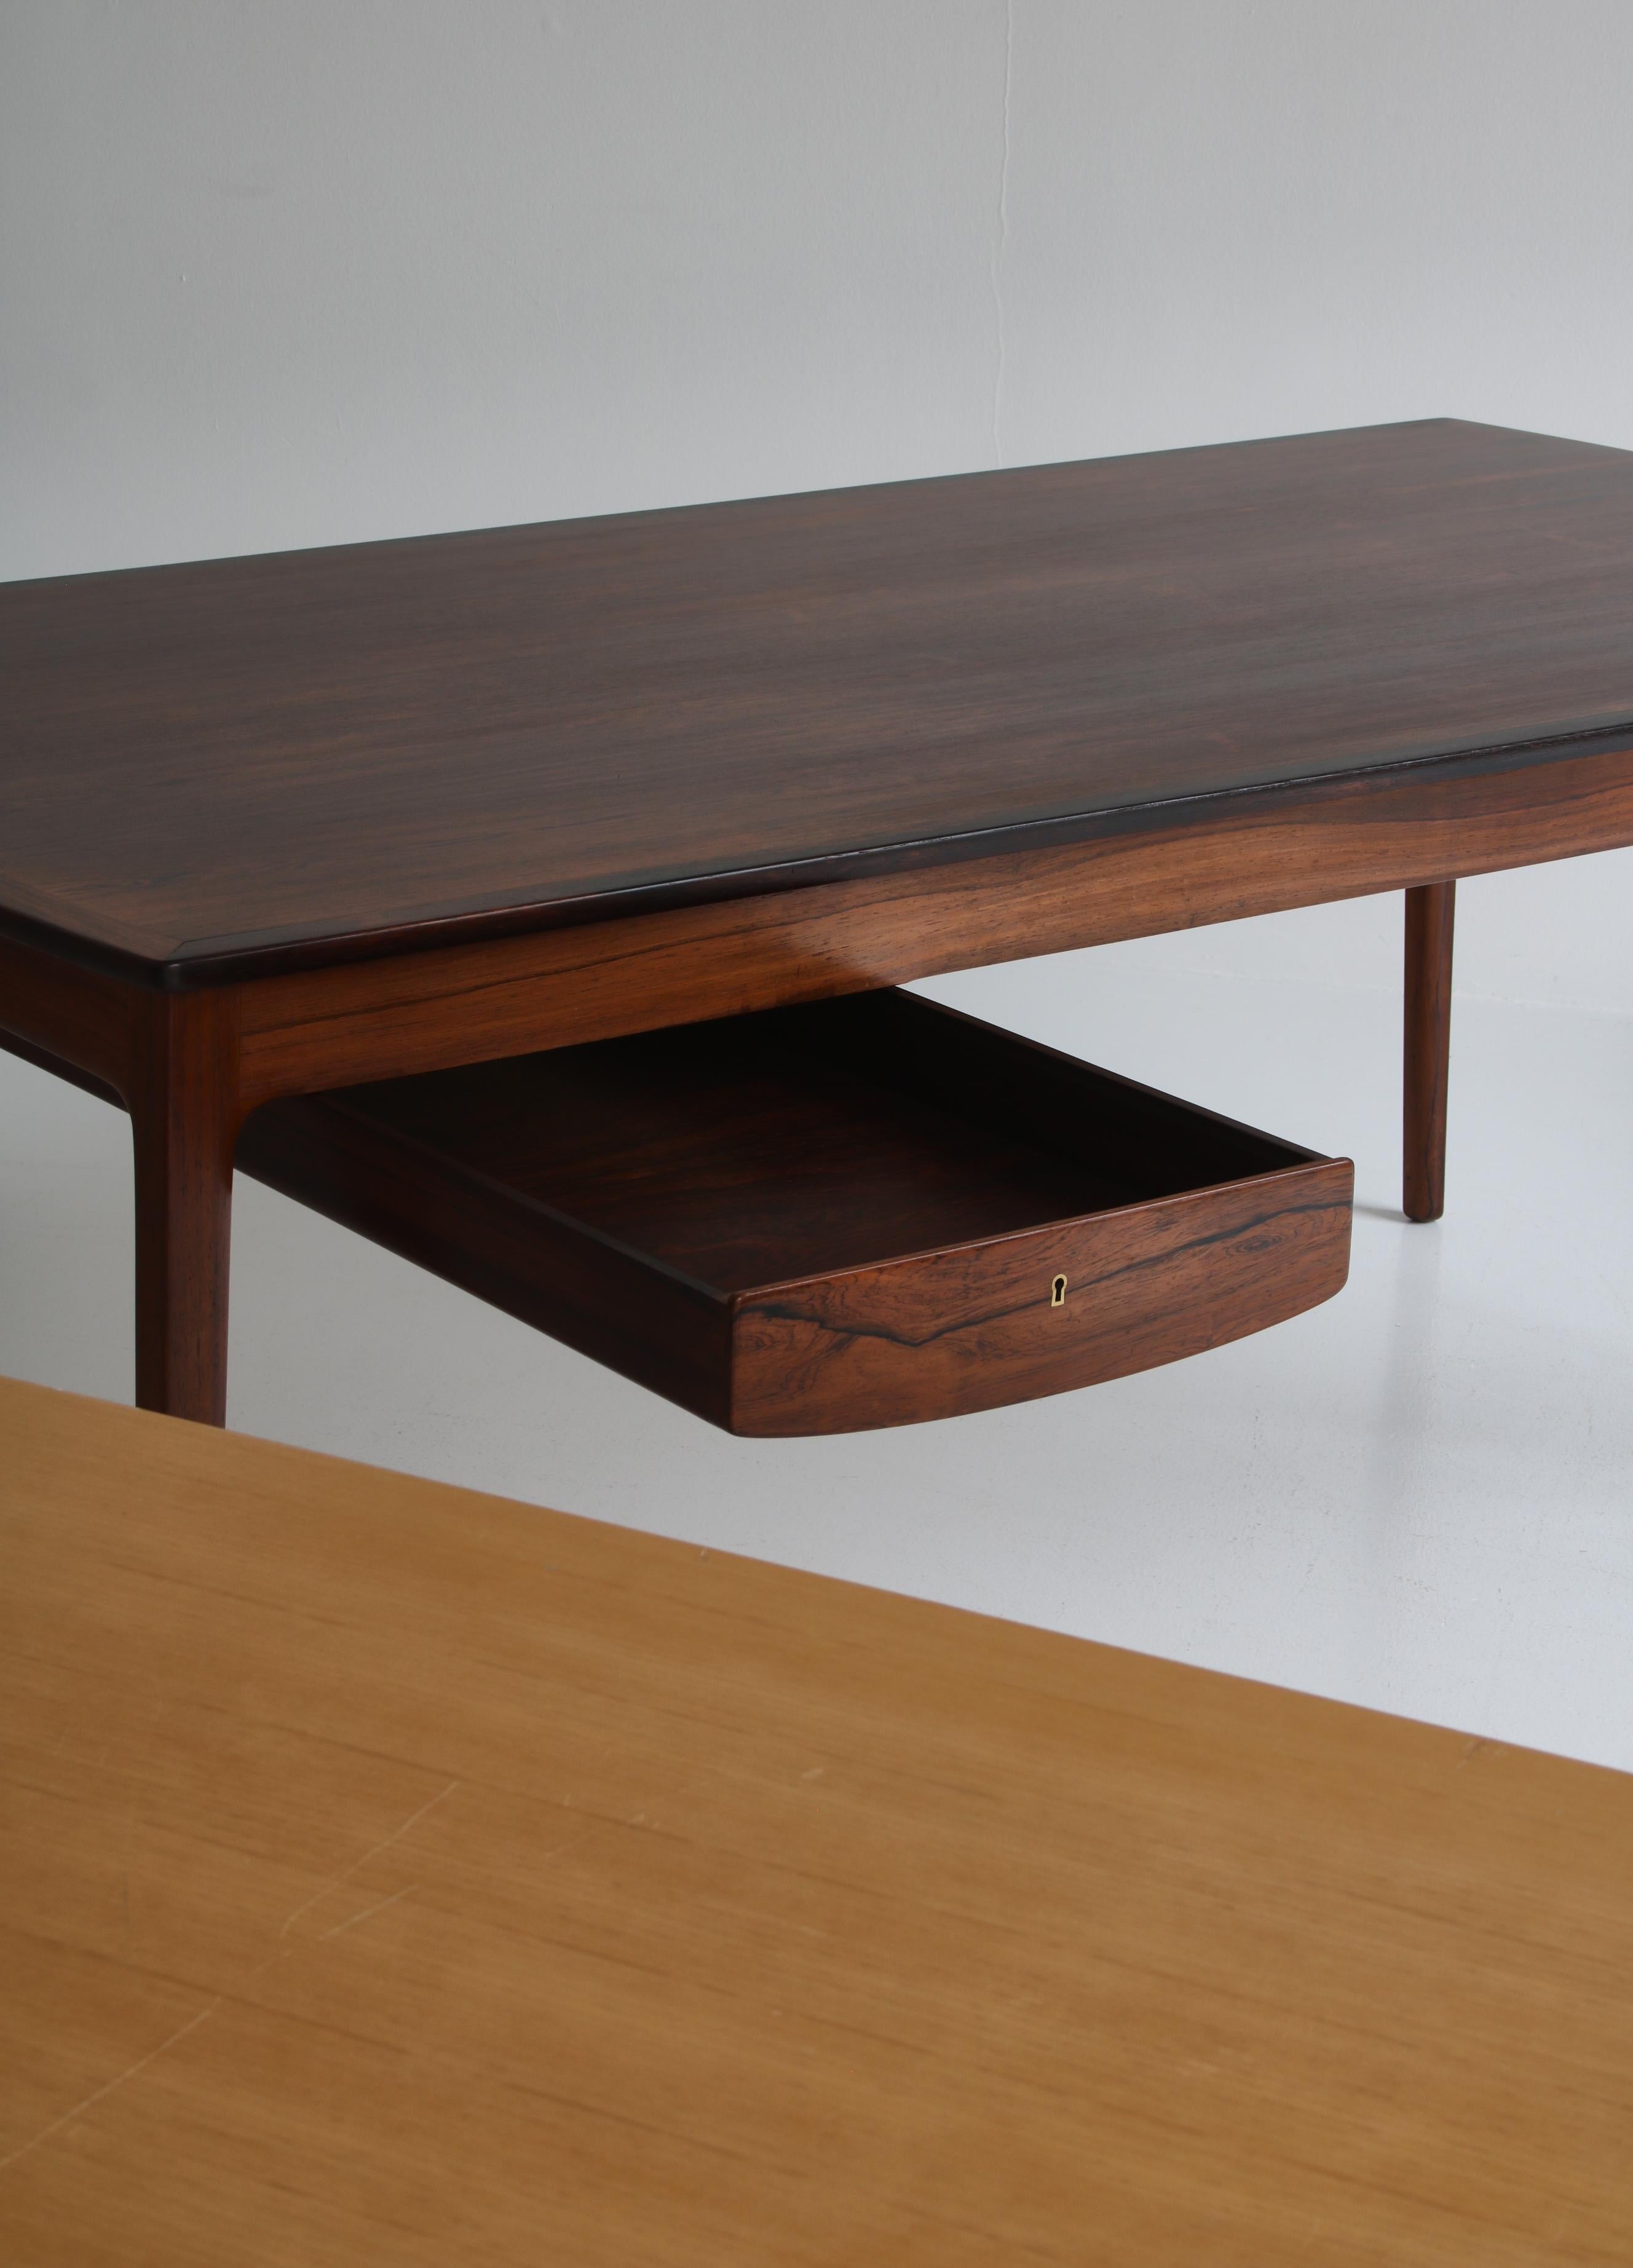 Rare and important desk designed by Ole Wanscher and manufactured at master cabinetmaker A.J. Iversen in 1959. Exhibited at the Danish Cabinetmakers Guild exhibition the same year. The desk is made from exclusive Brazilian Rosewood with the most